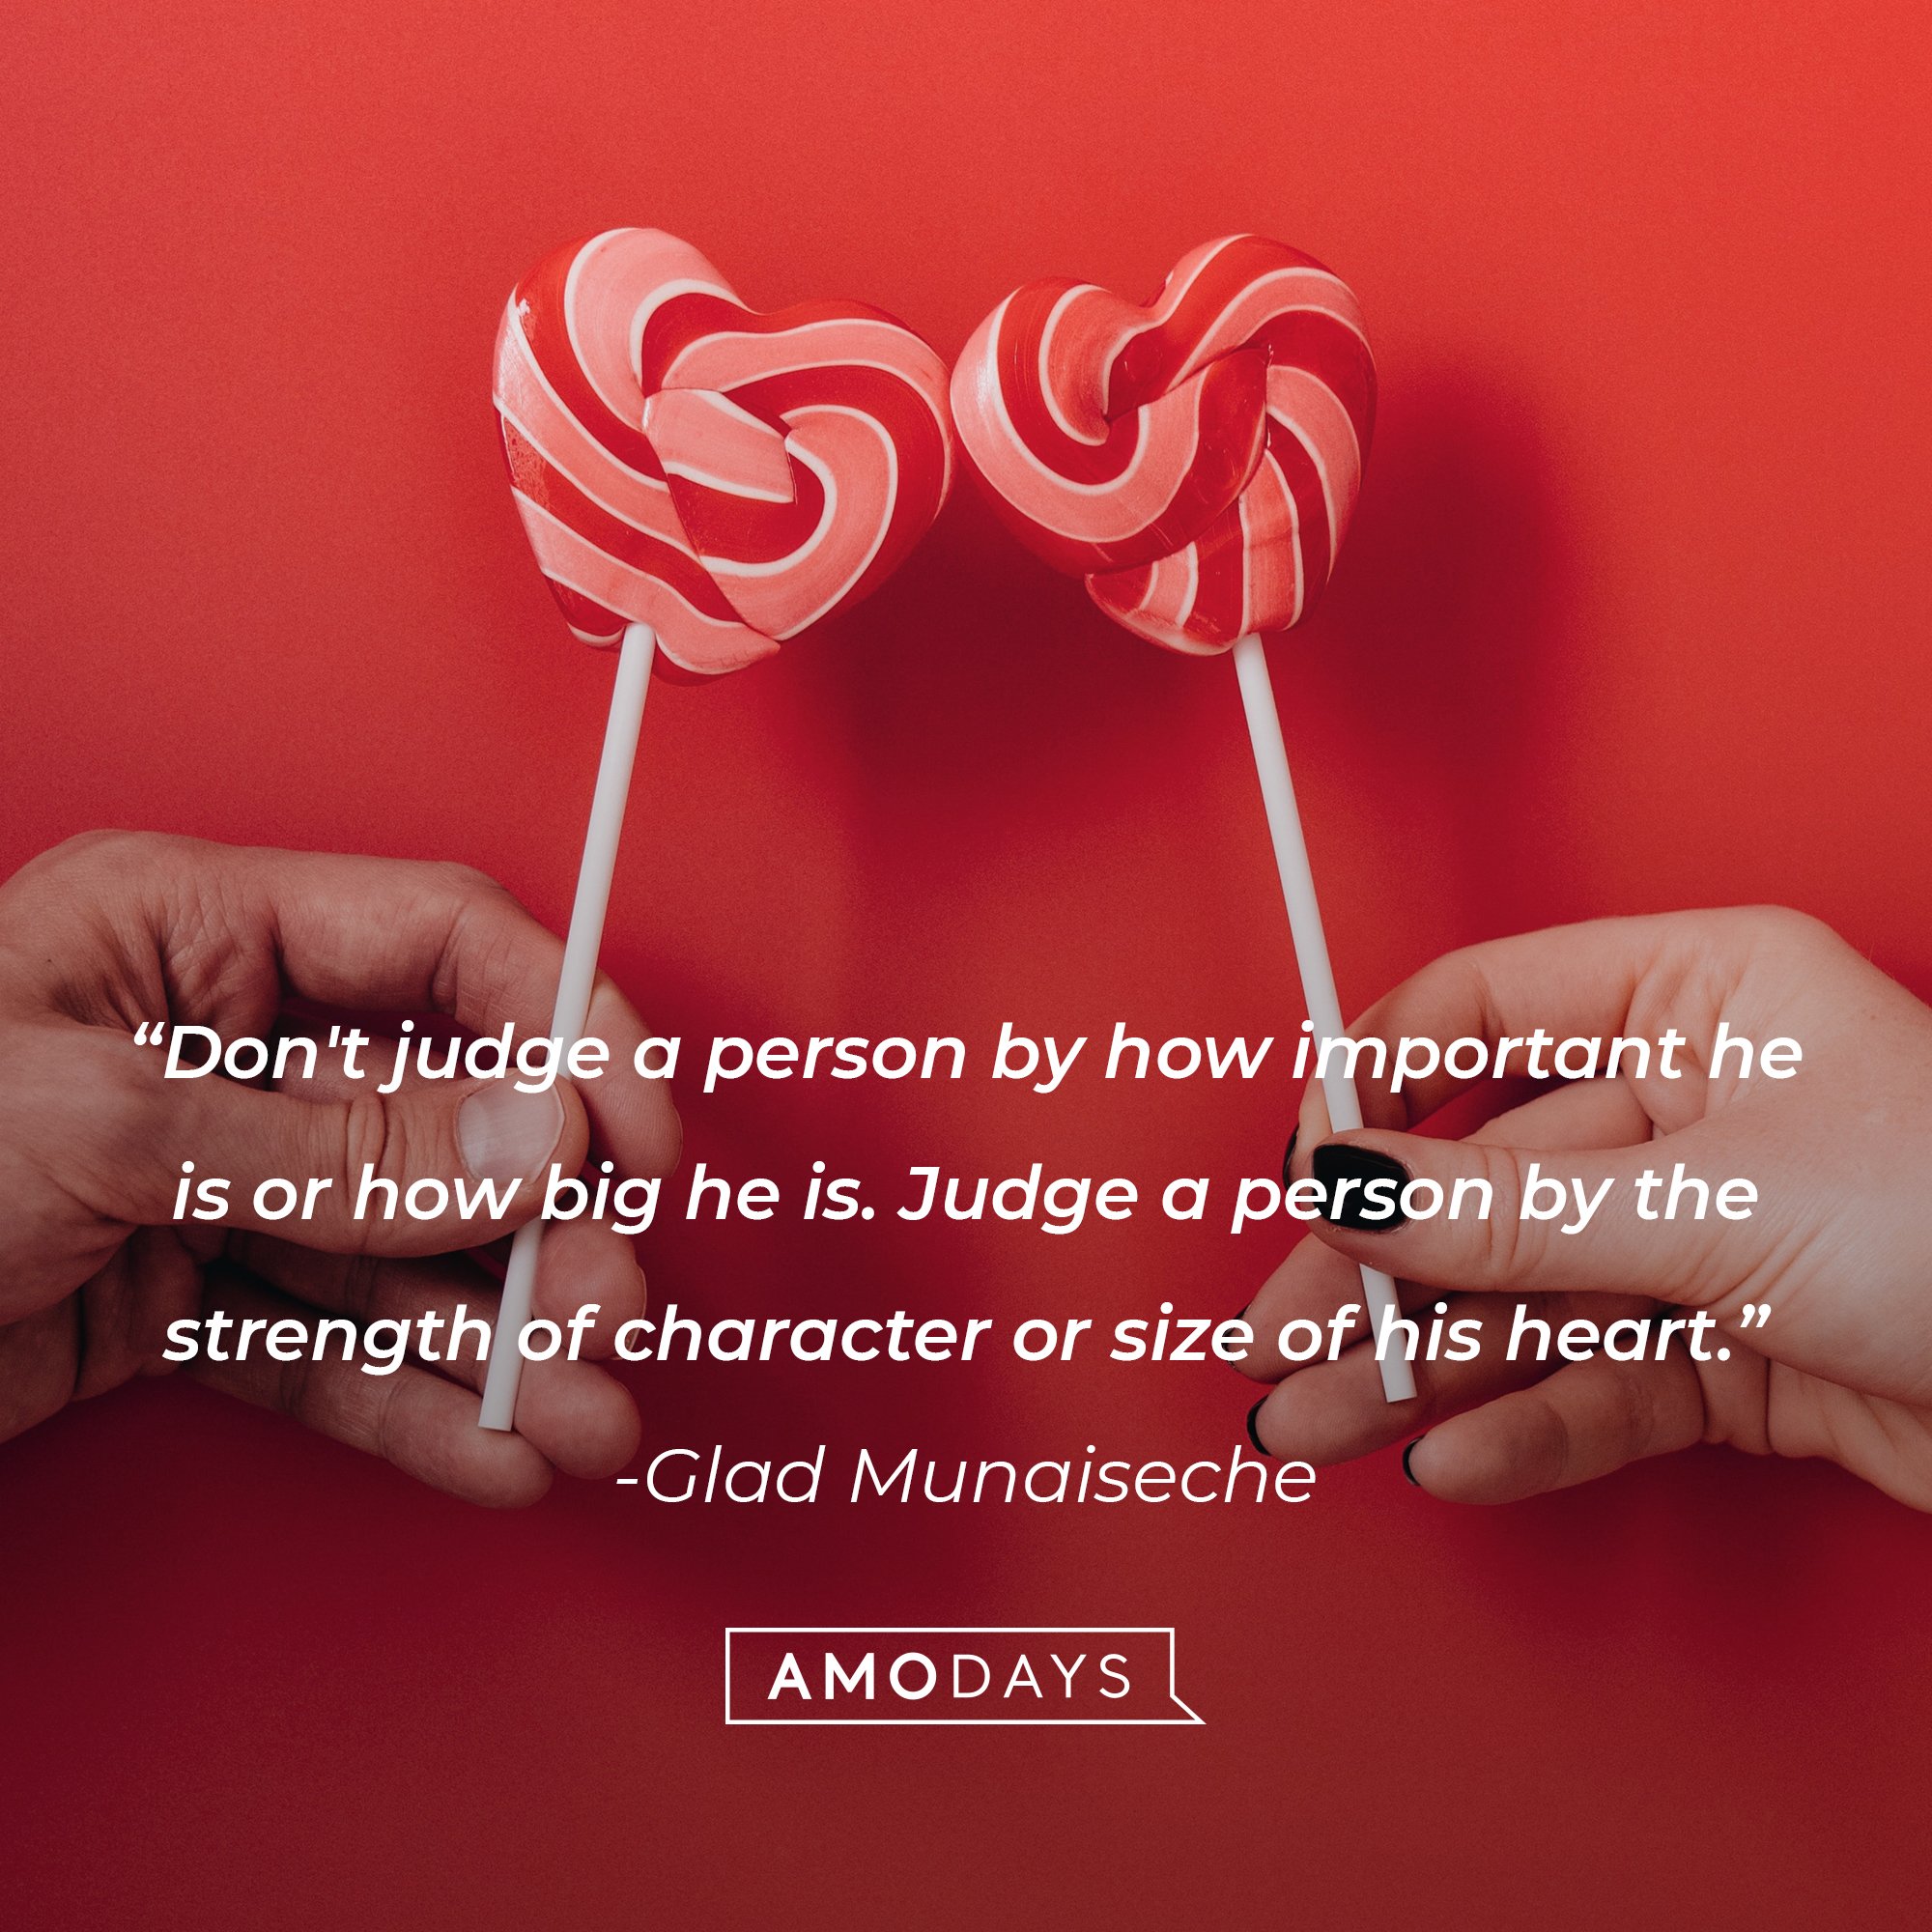 Glad Munaiseche's quote: "Don't judge a person by how important he is or how big he is. Judge a person by the strength of character or size of his heart." | Image: AmoDays